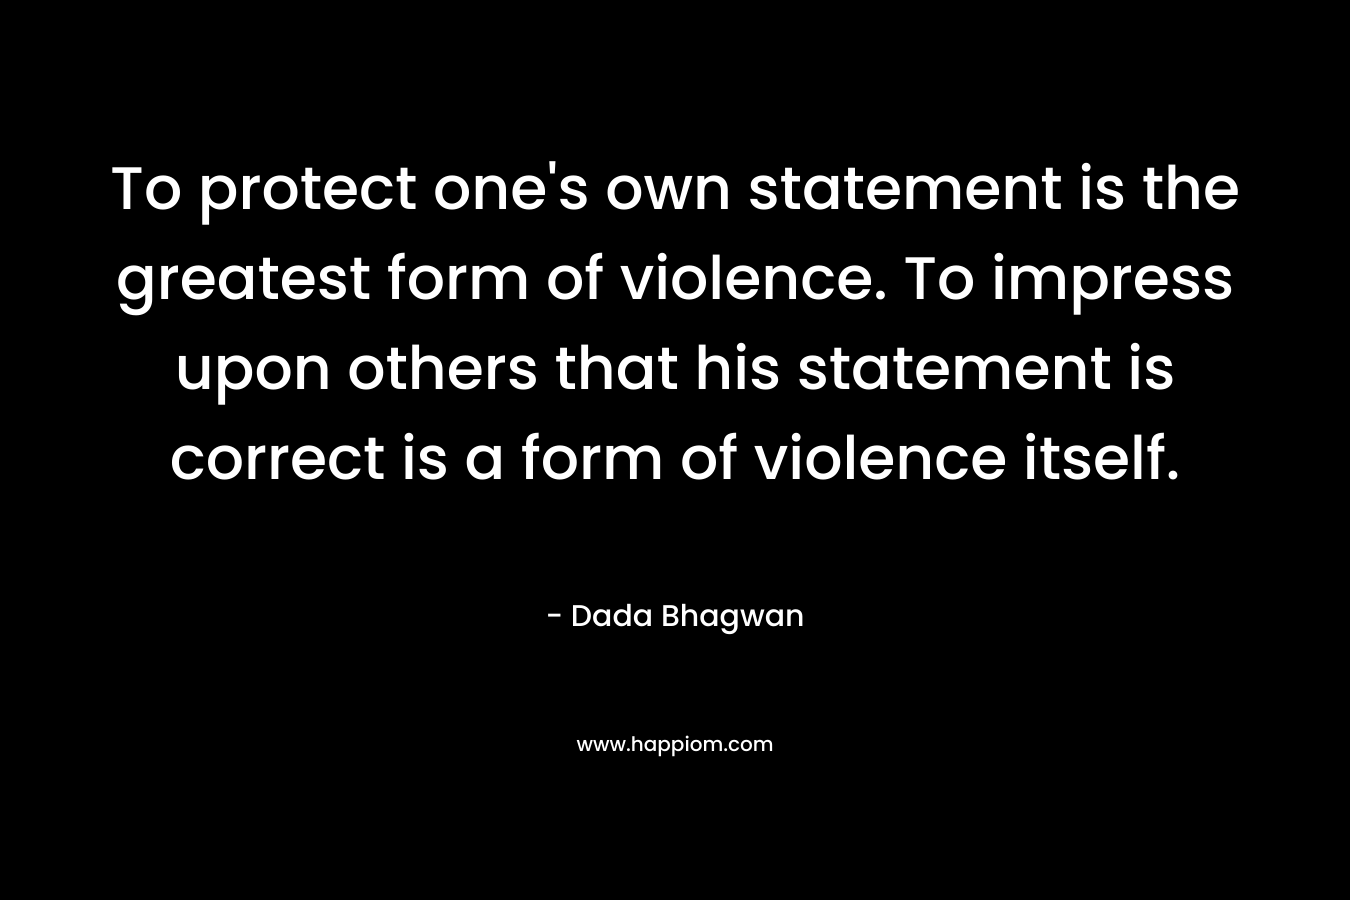 To protect one's own statement is the greatest form of violence. To impress upon others that his statement is correct is a form of violence itself.